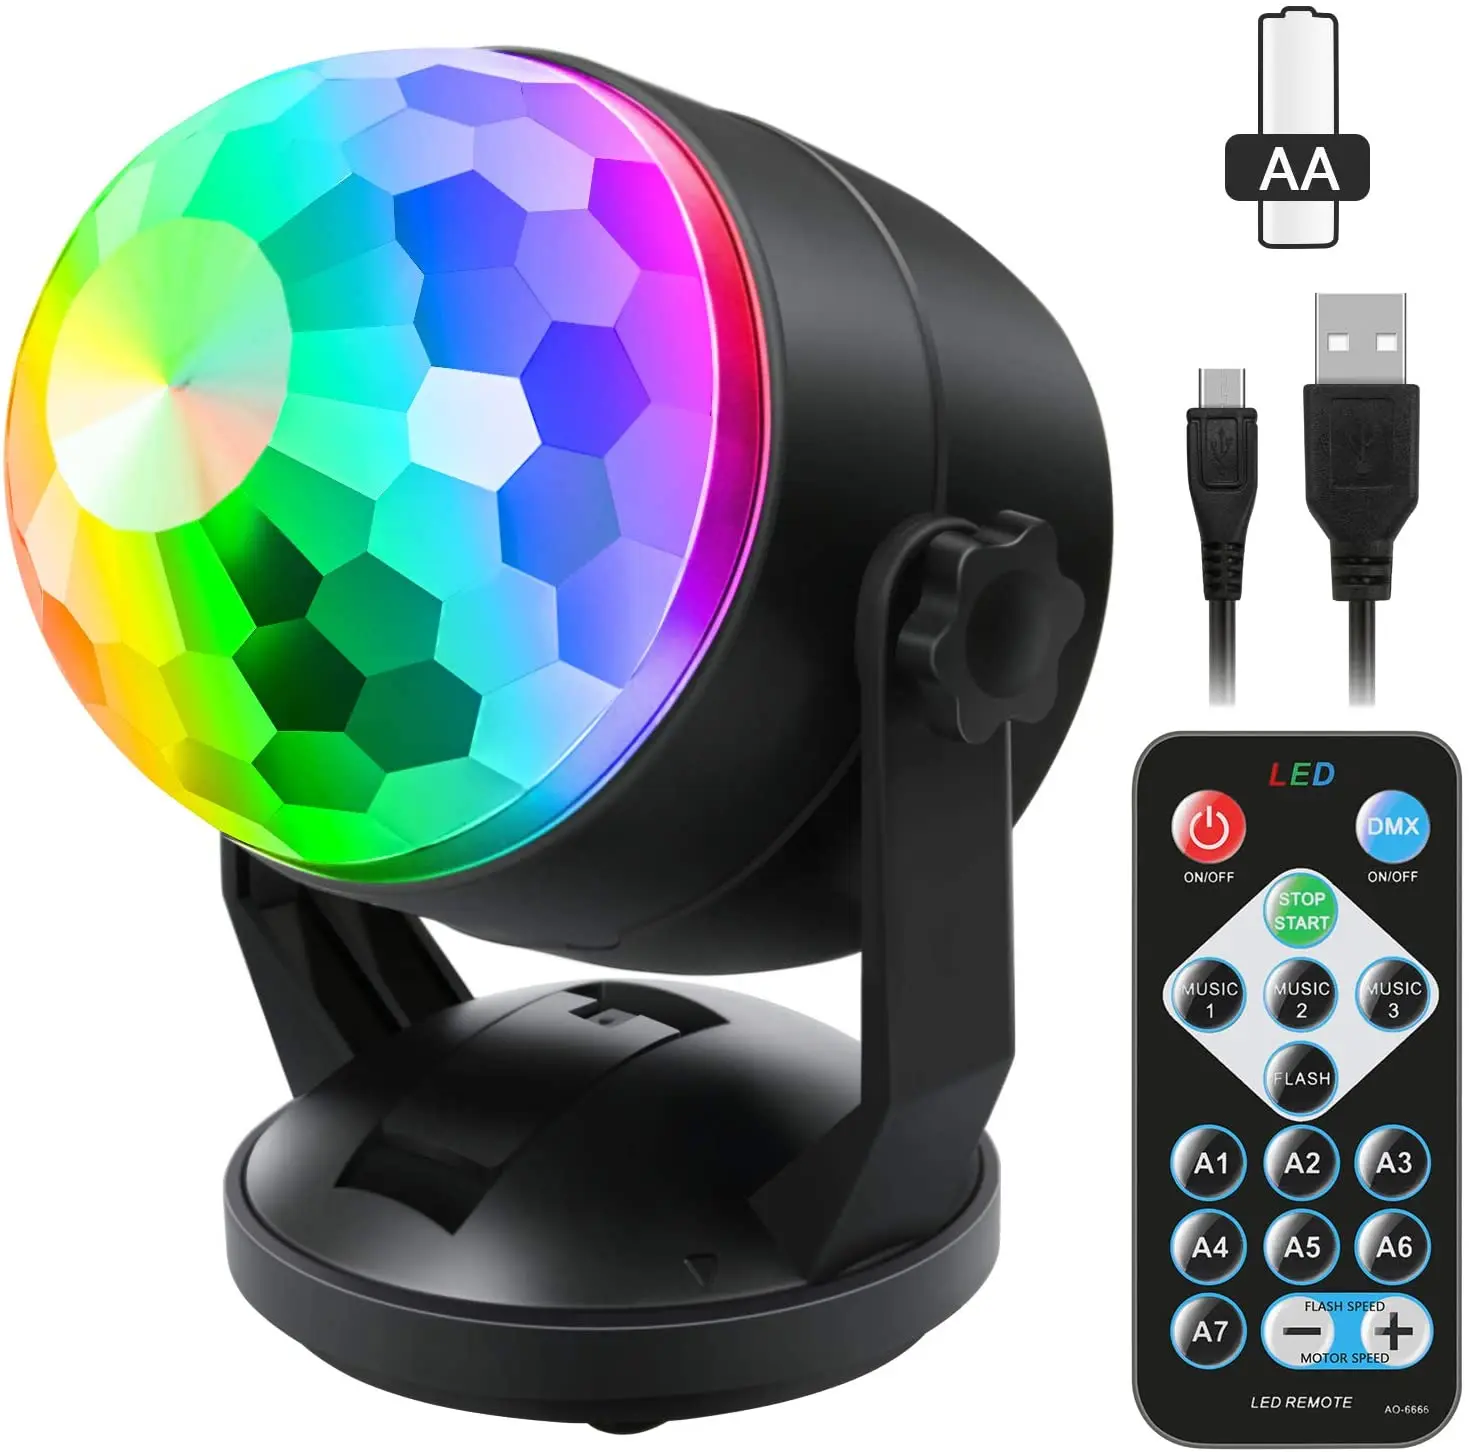 Sound Activated Party Lights with Remote Control Dj Lighting RBG Disco Ball Strobe Lamp 7 Modes Stage Par Light for Home Room